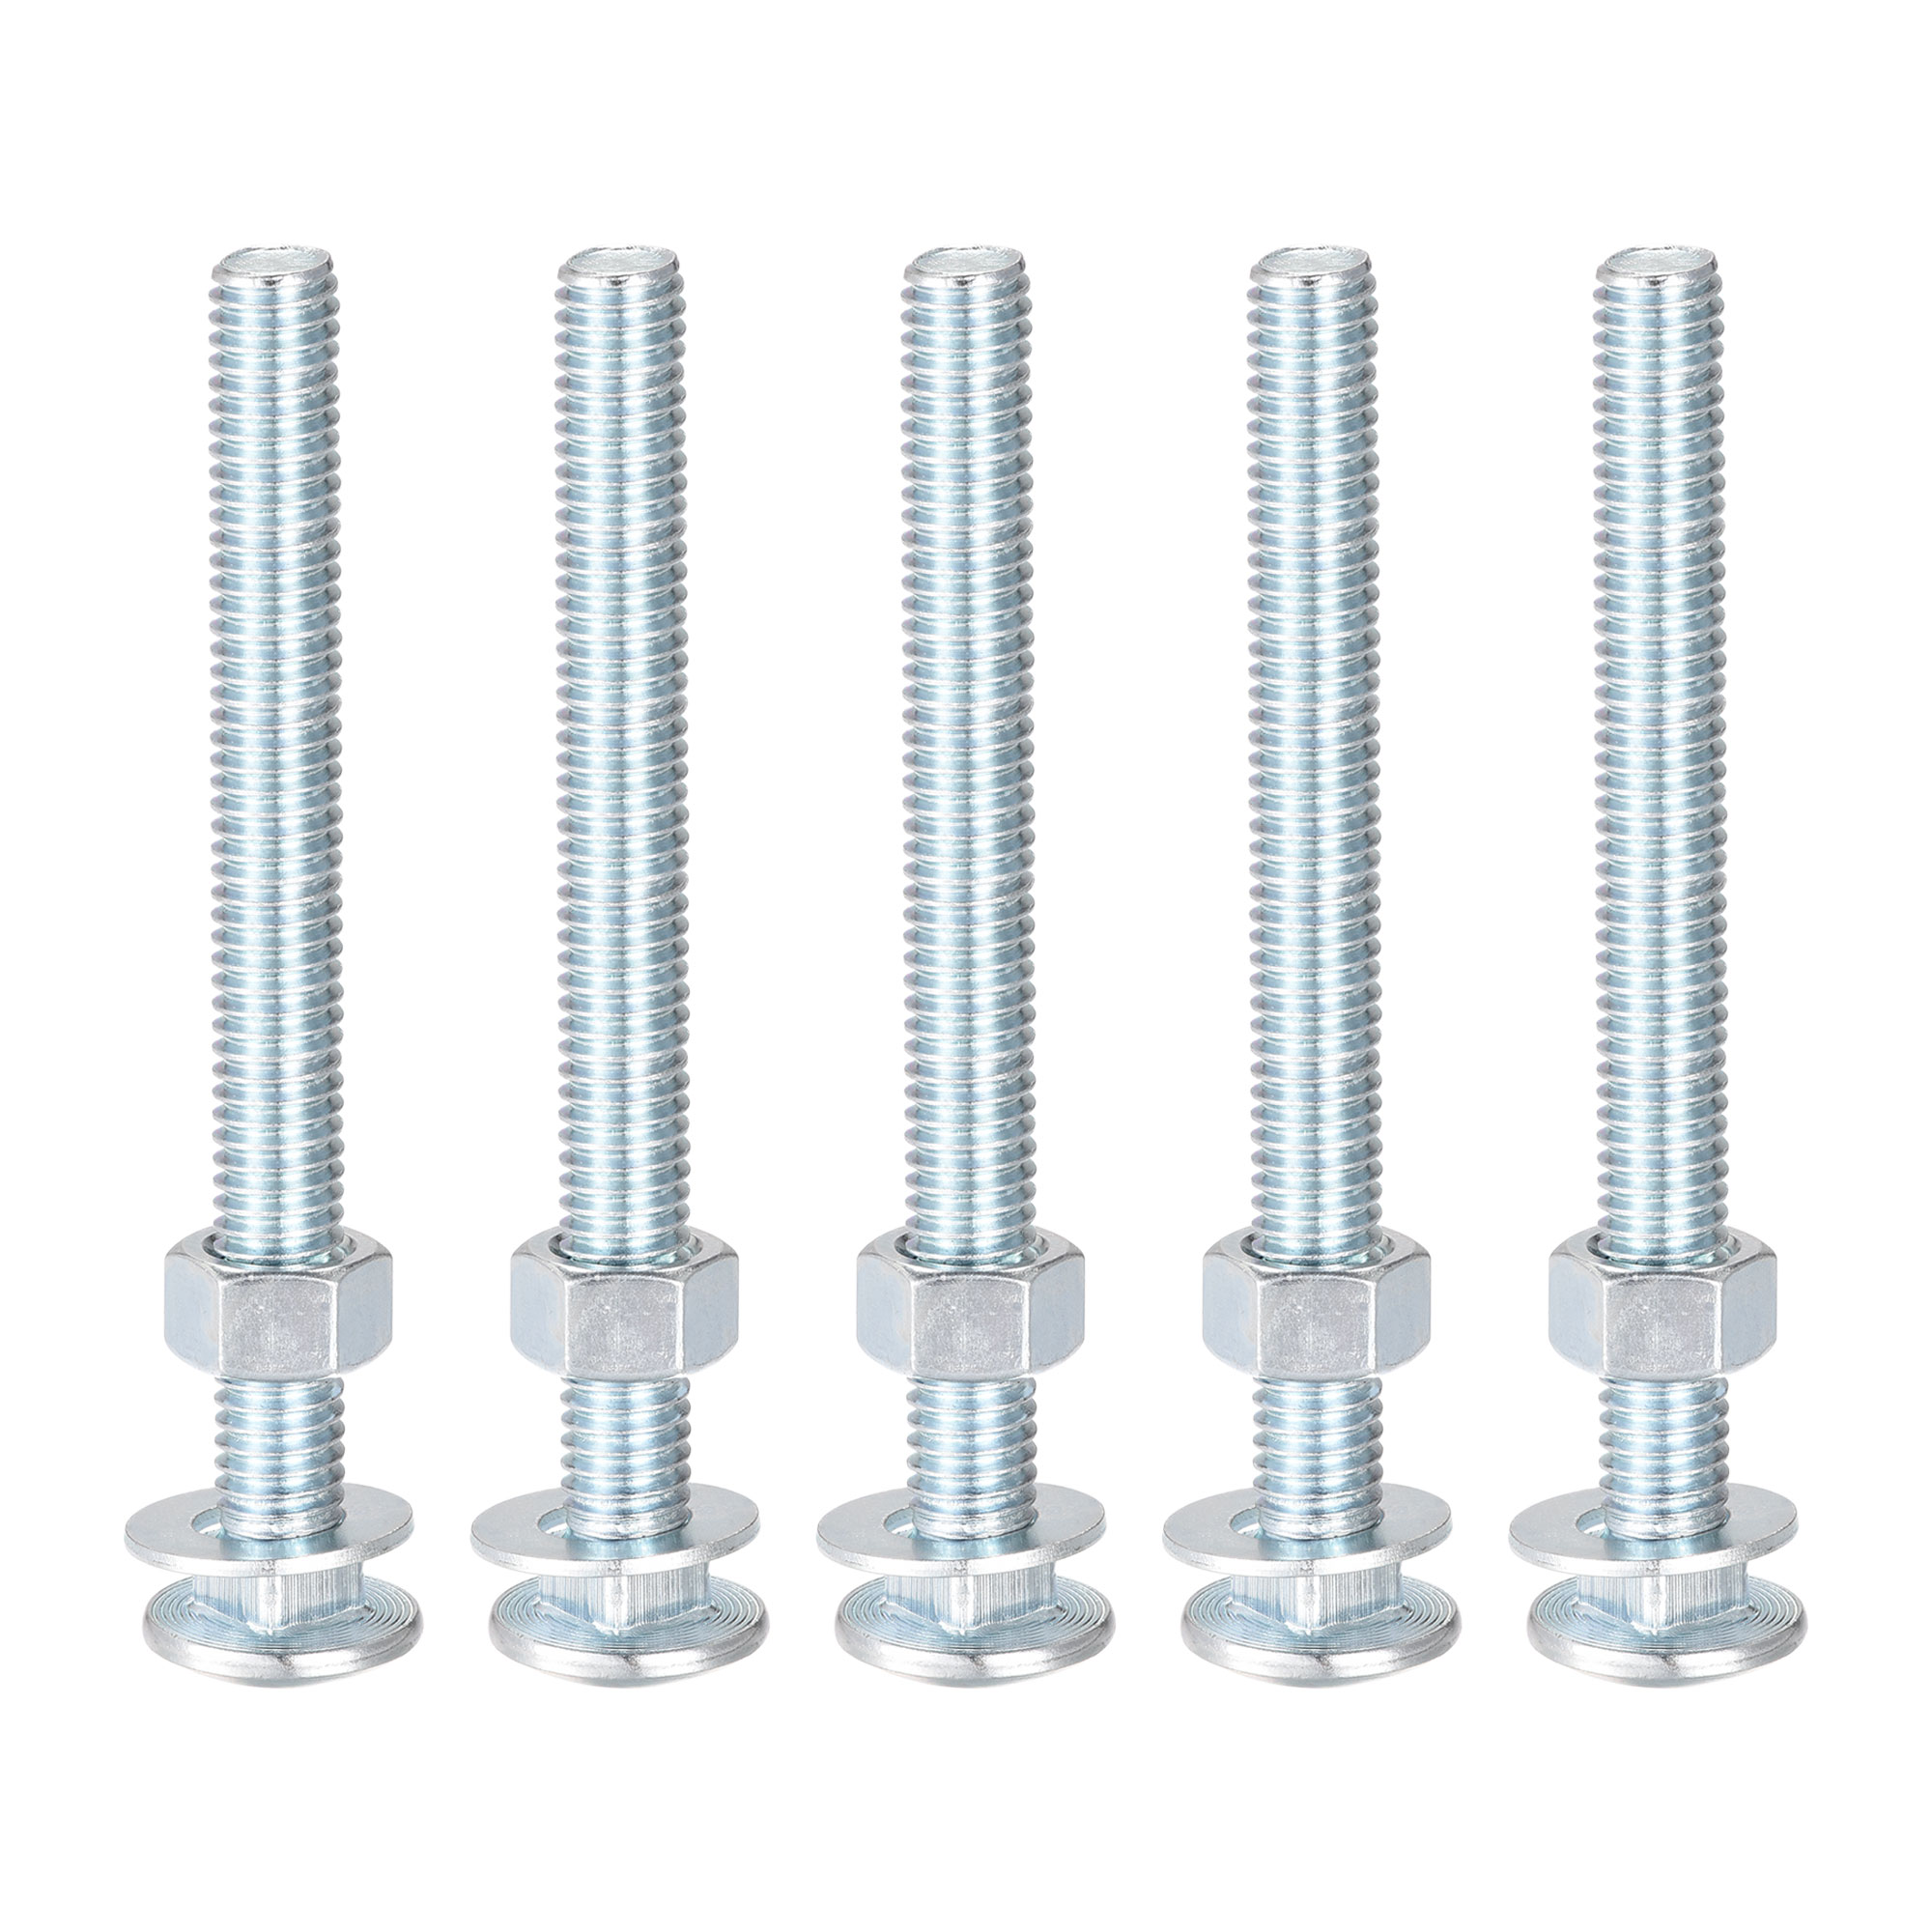 Uxcell 3/8-16 x 4" Carbon Steel Square Neck Carriage Bolts with Nuts & Washers 5 Set - image 5 of 5